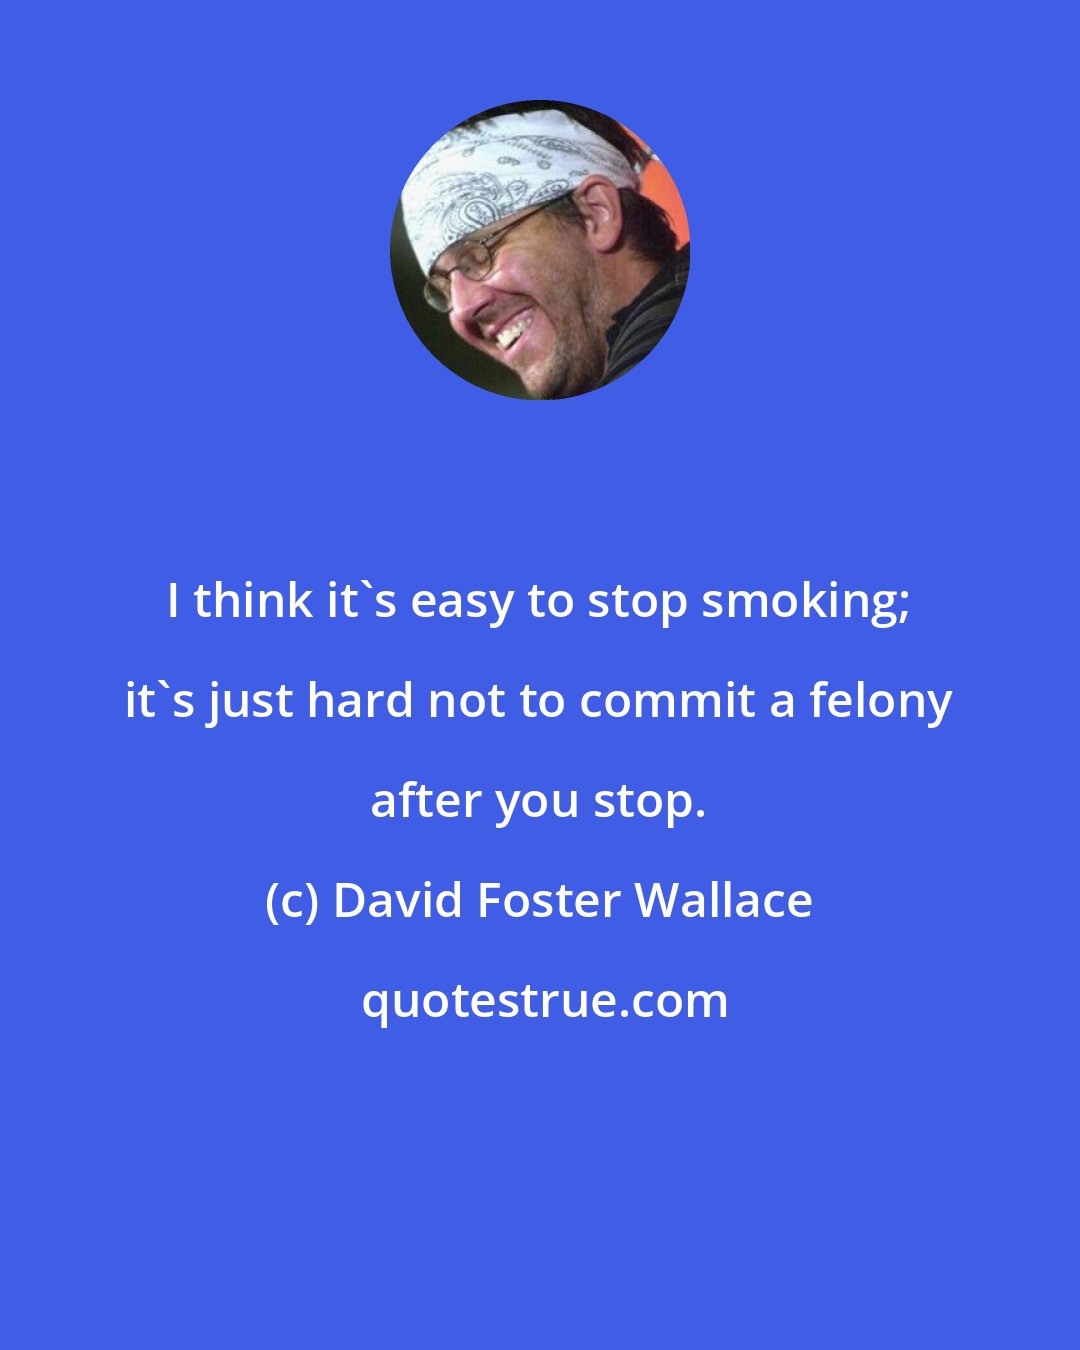 David Foster Wallace: I think it's easy to stop smoking; it's just hard not to commit a felony after you stop.